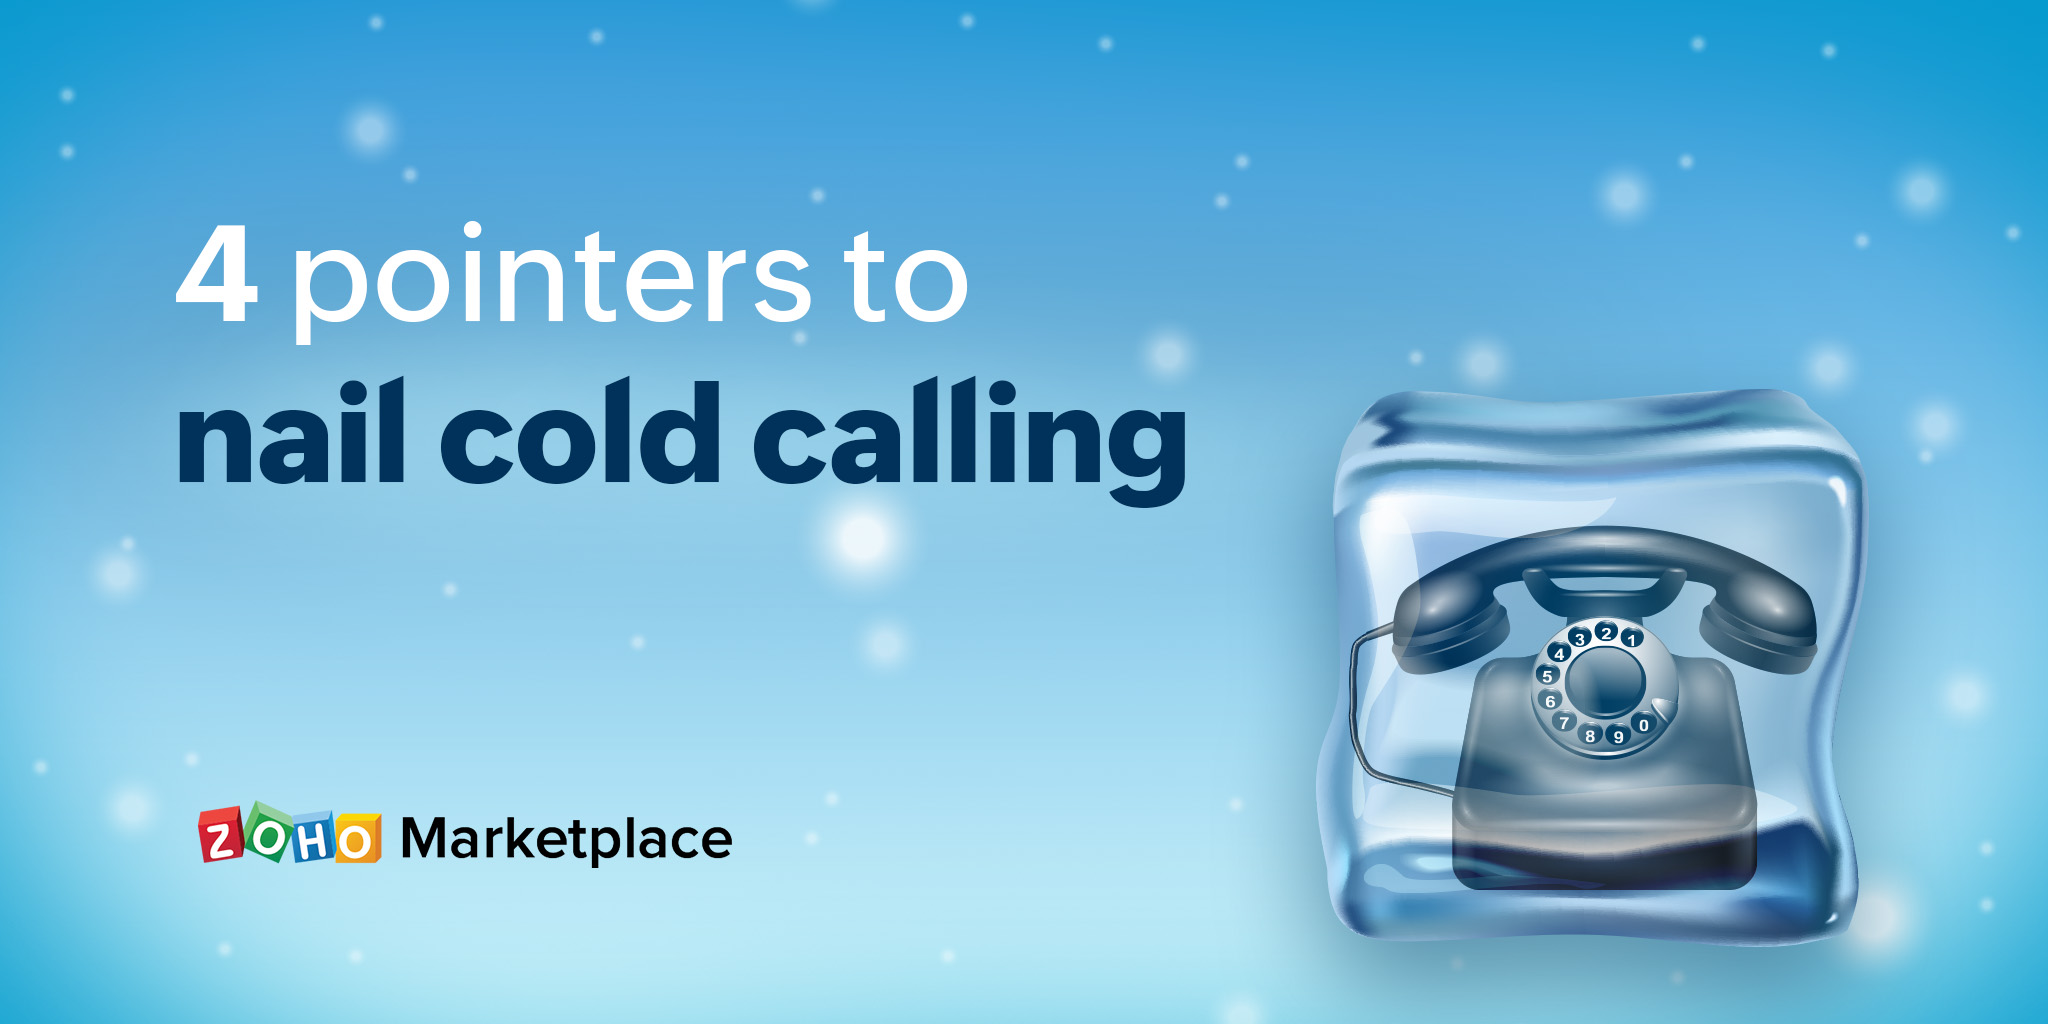 4 pointers to nail cold calling